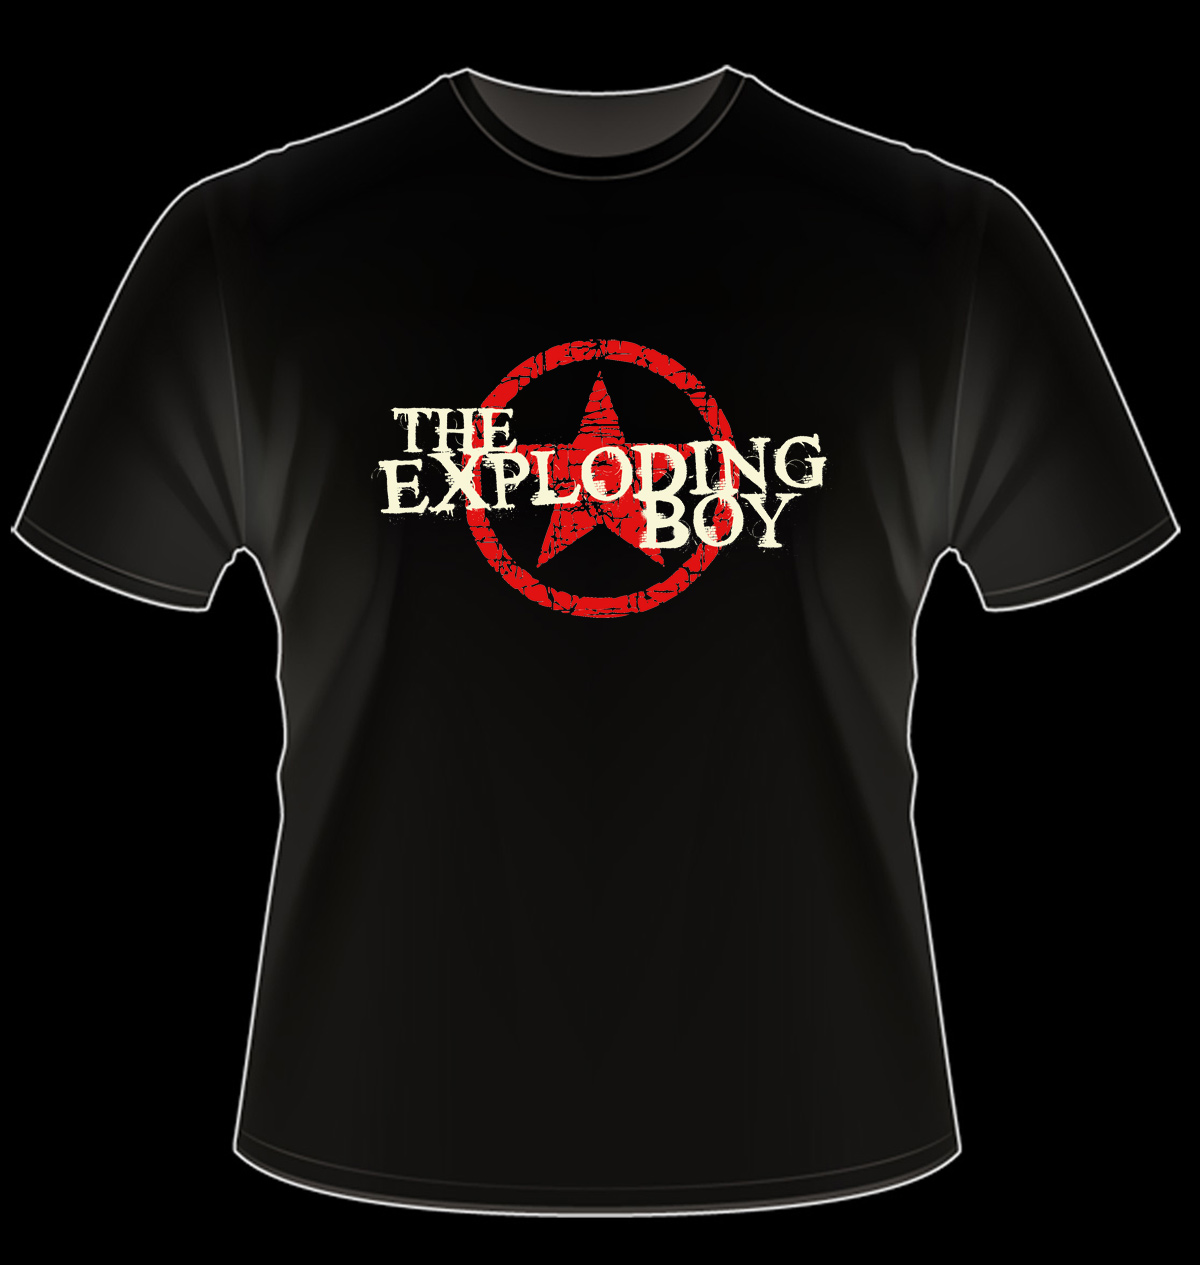 The Exploding Boy - Star T-shirt, click for larger version.